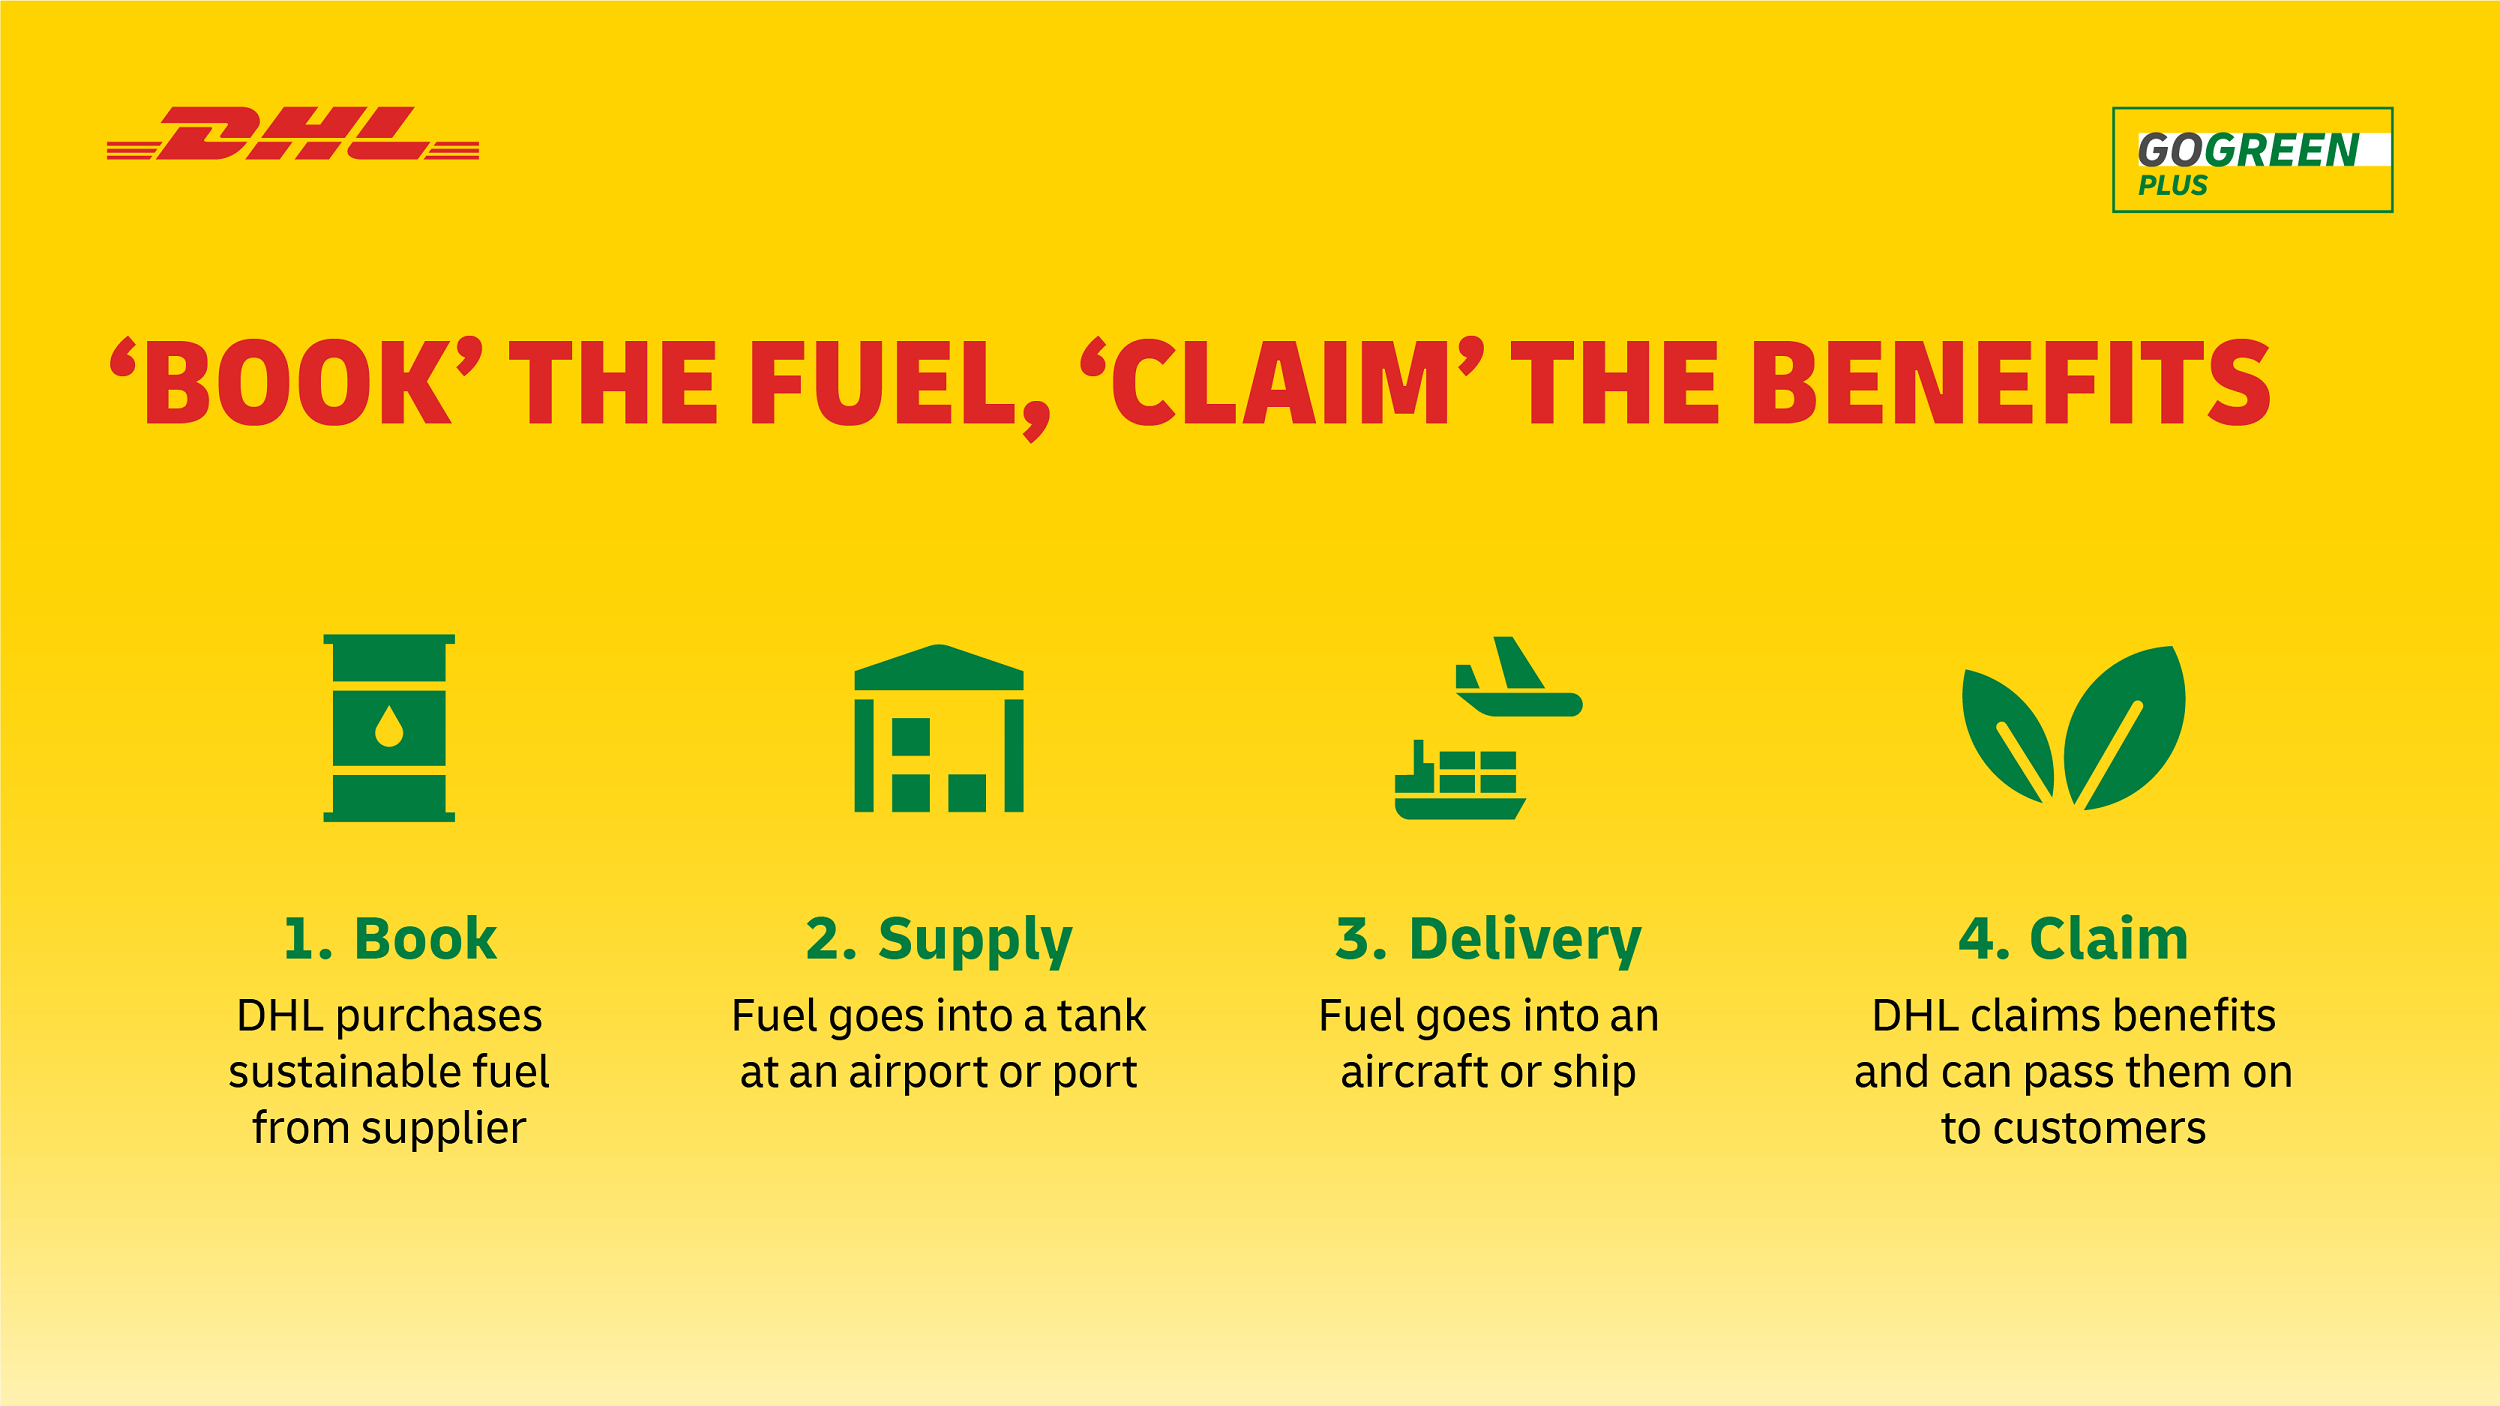 DHL Express GoGreen Plus Book and Claim